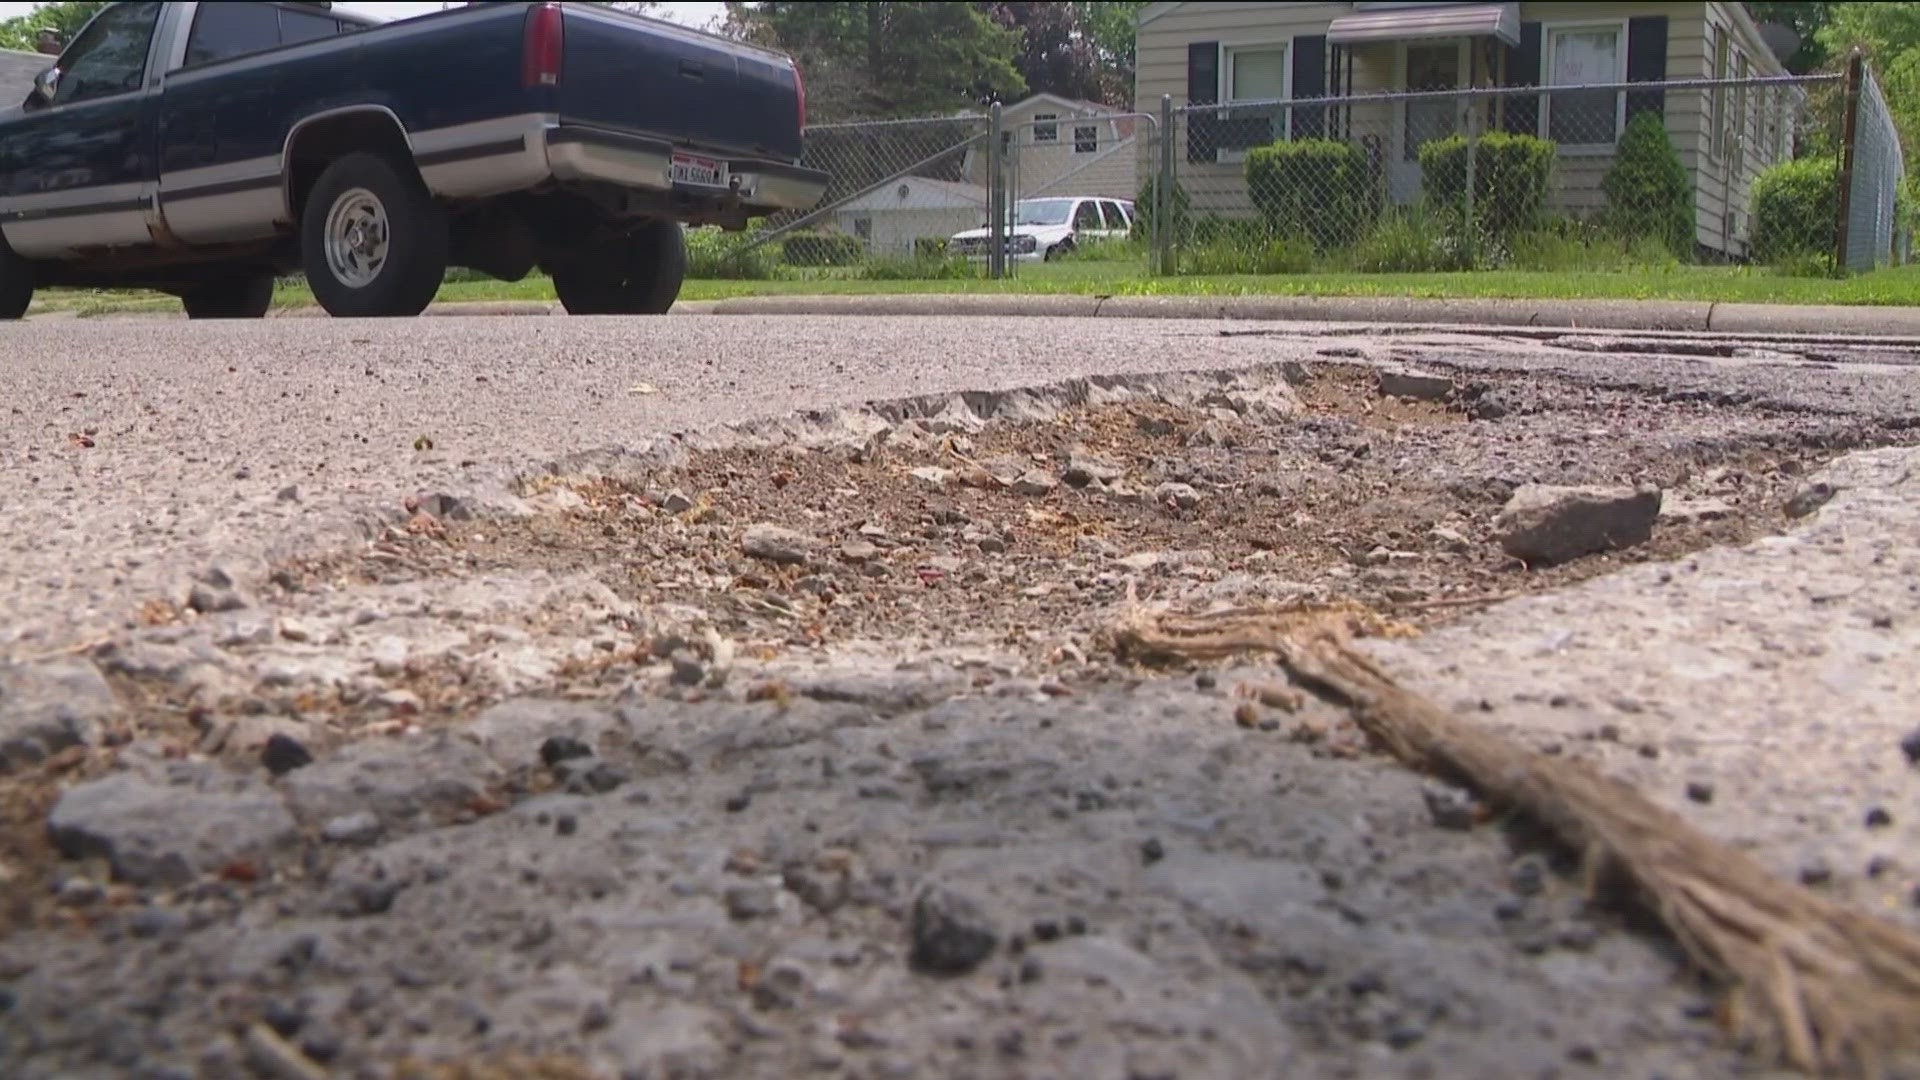 A longtime resident is concerned the potholes on his street may not be fixed by the city of Toledo and contacted Call 11 for Action to get results.